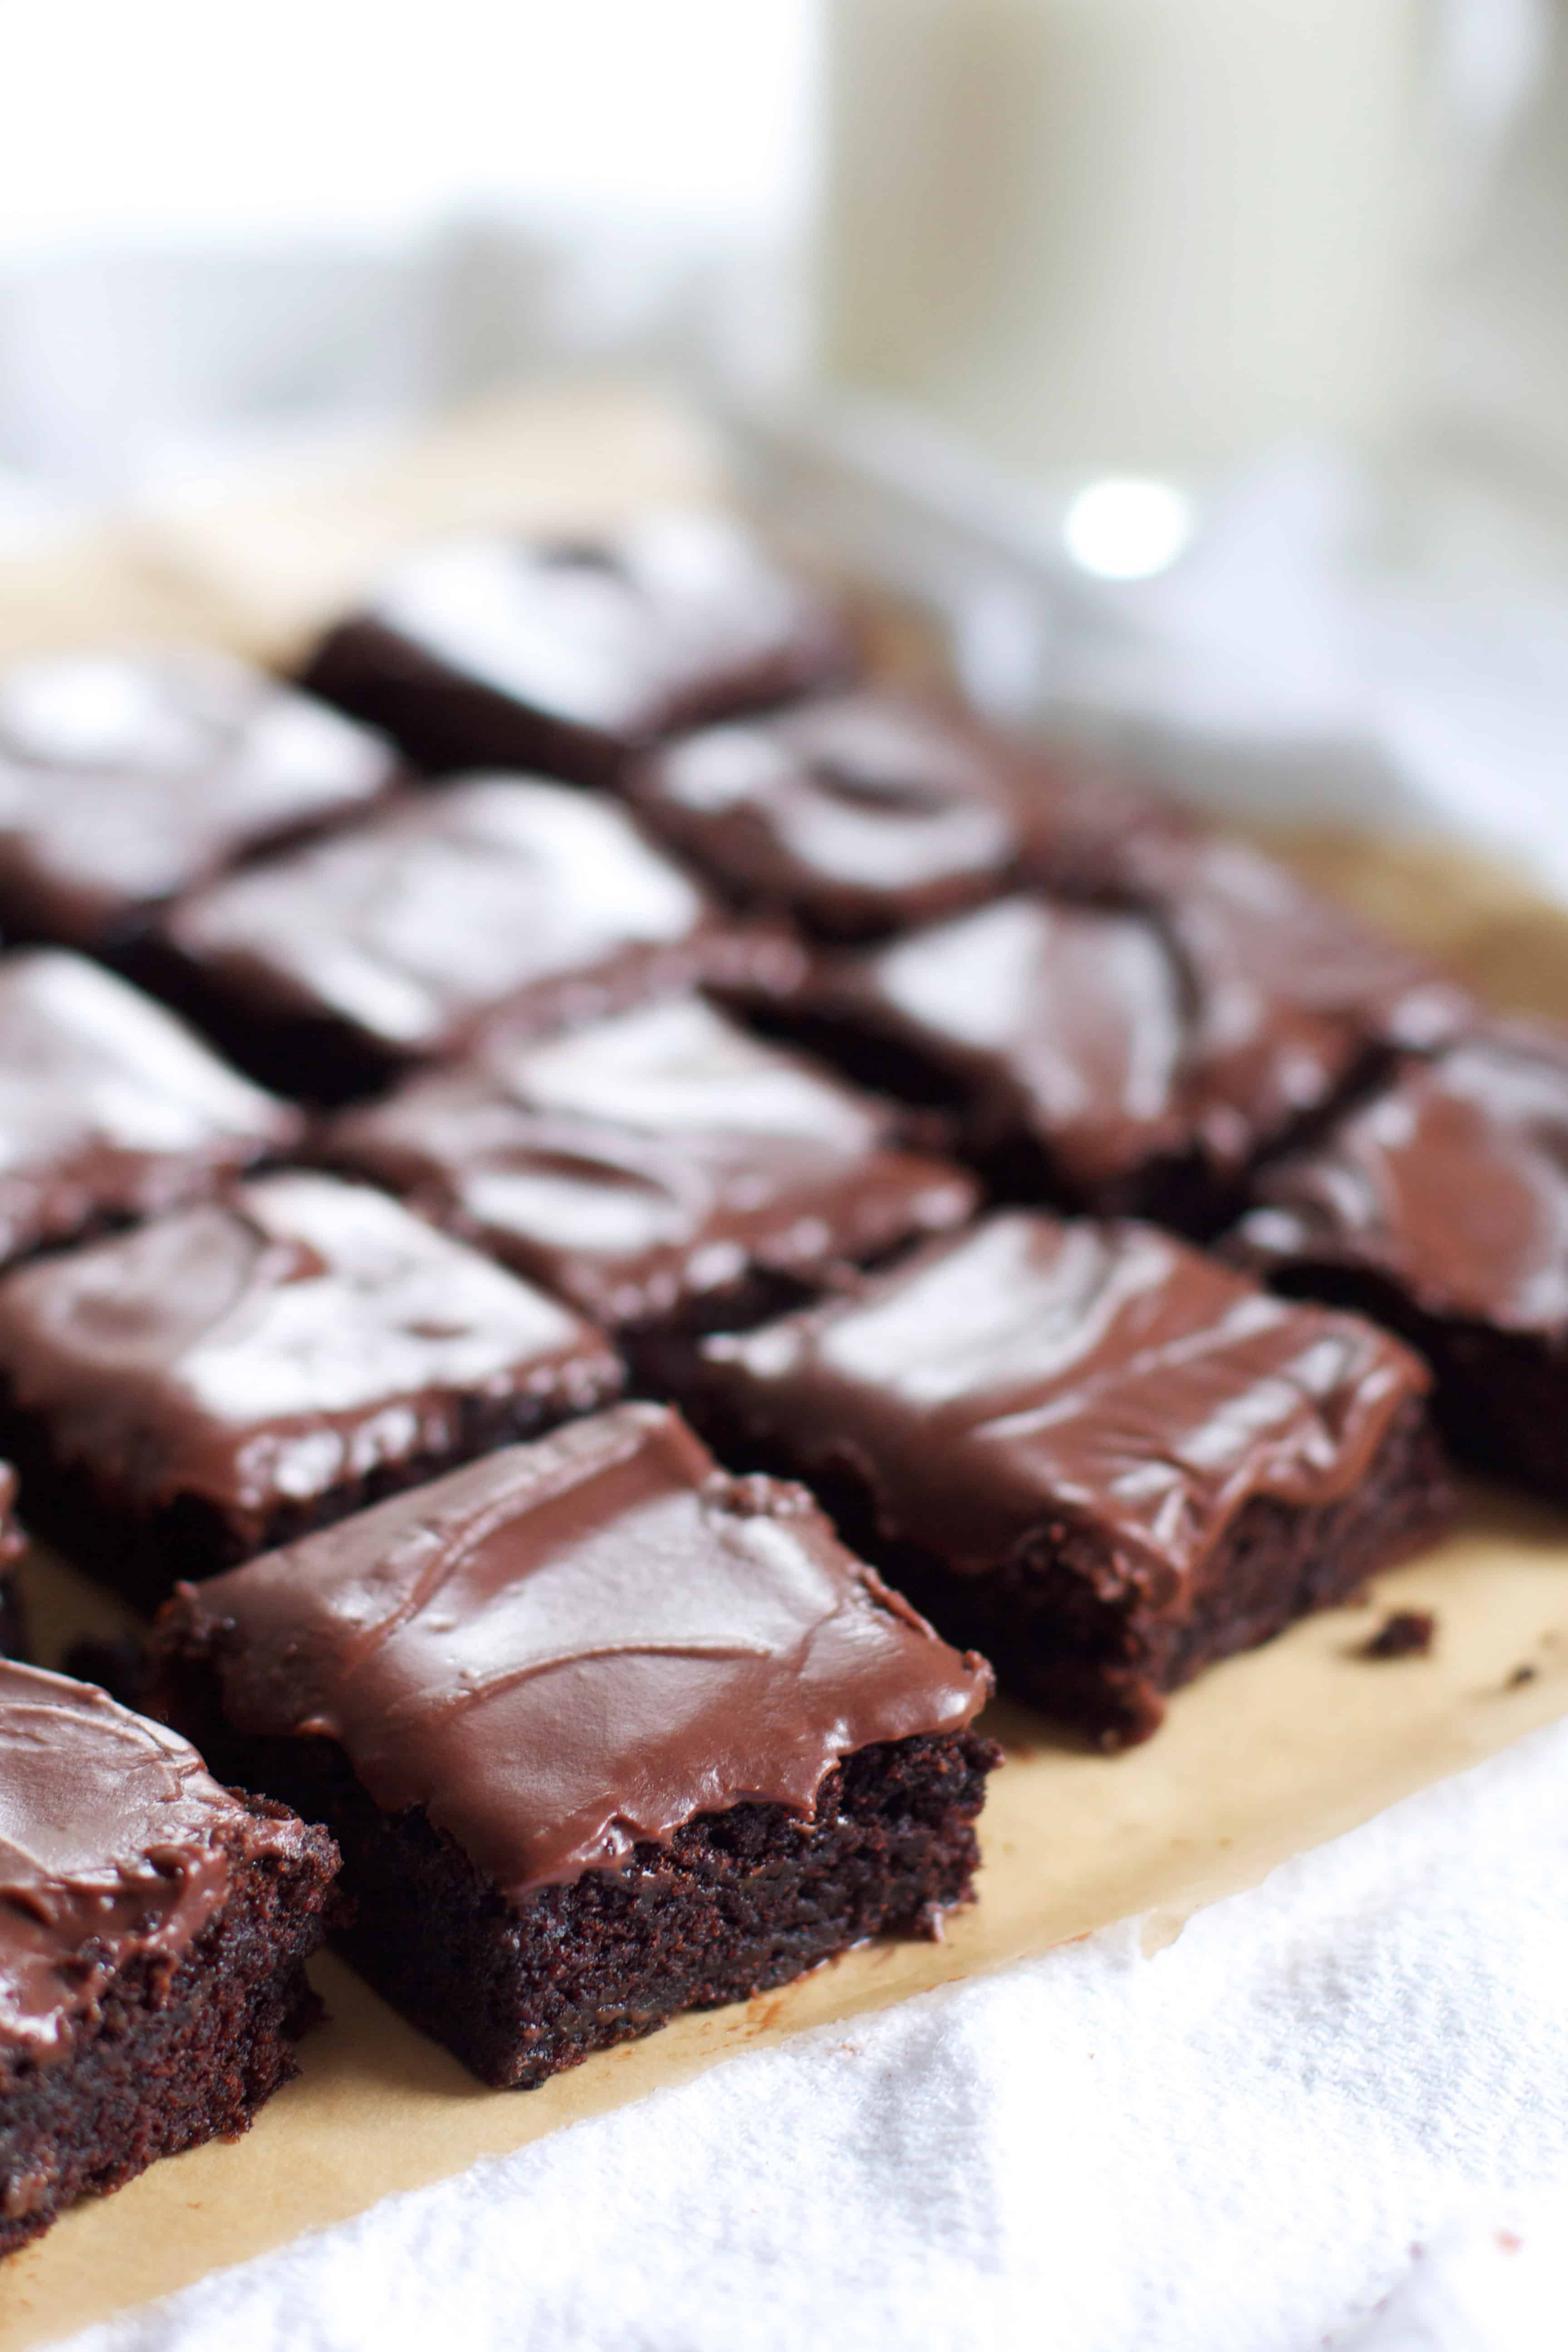 annies home: Zucchini Brownies